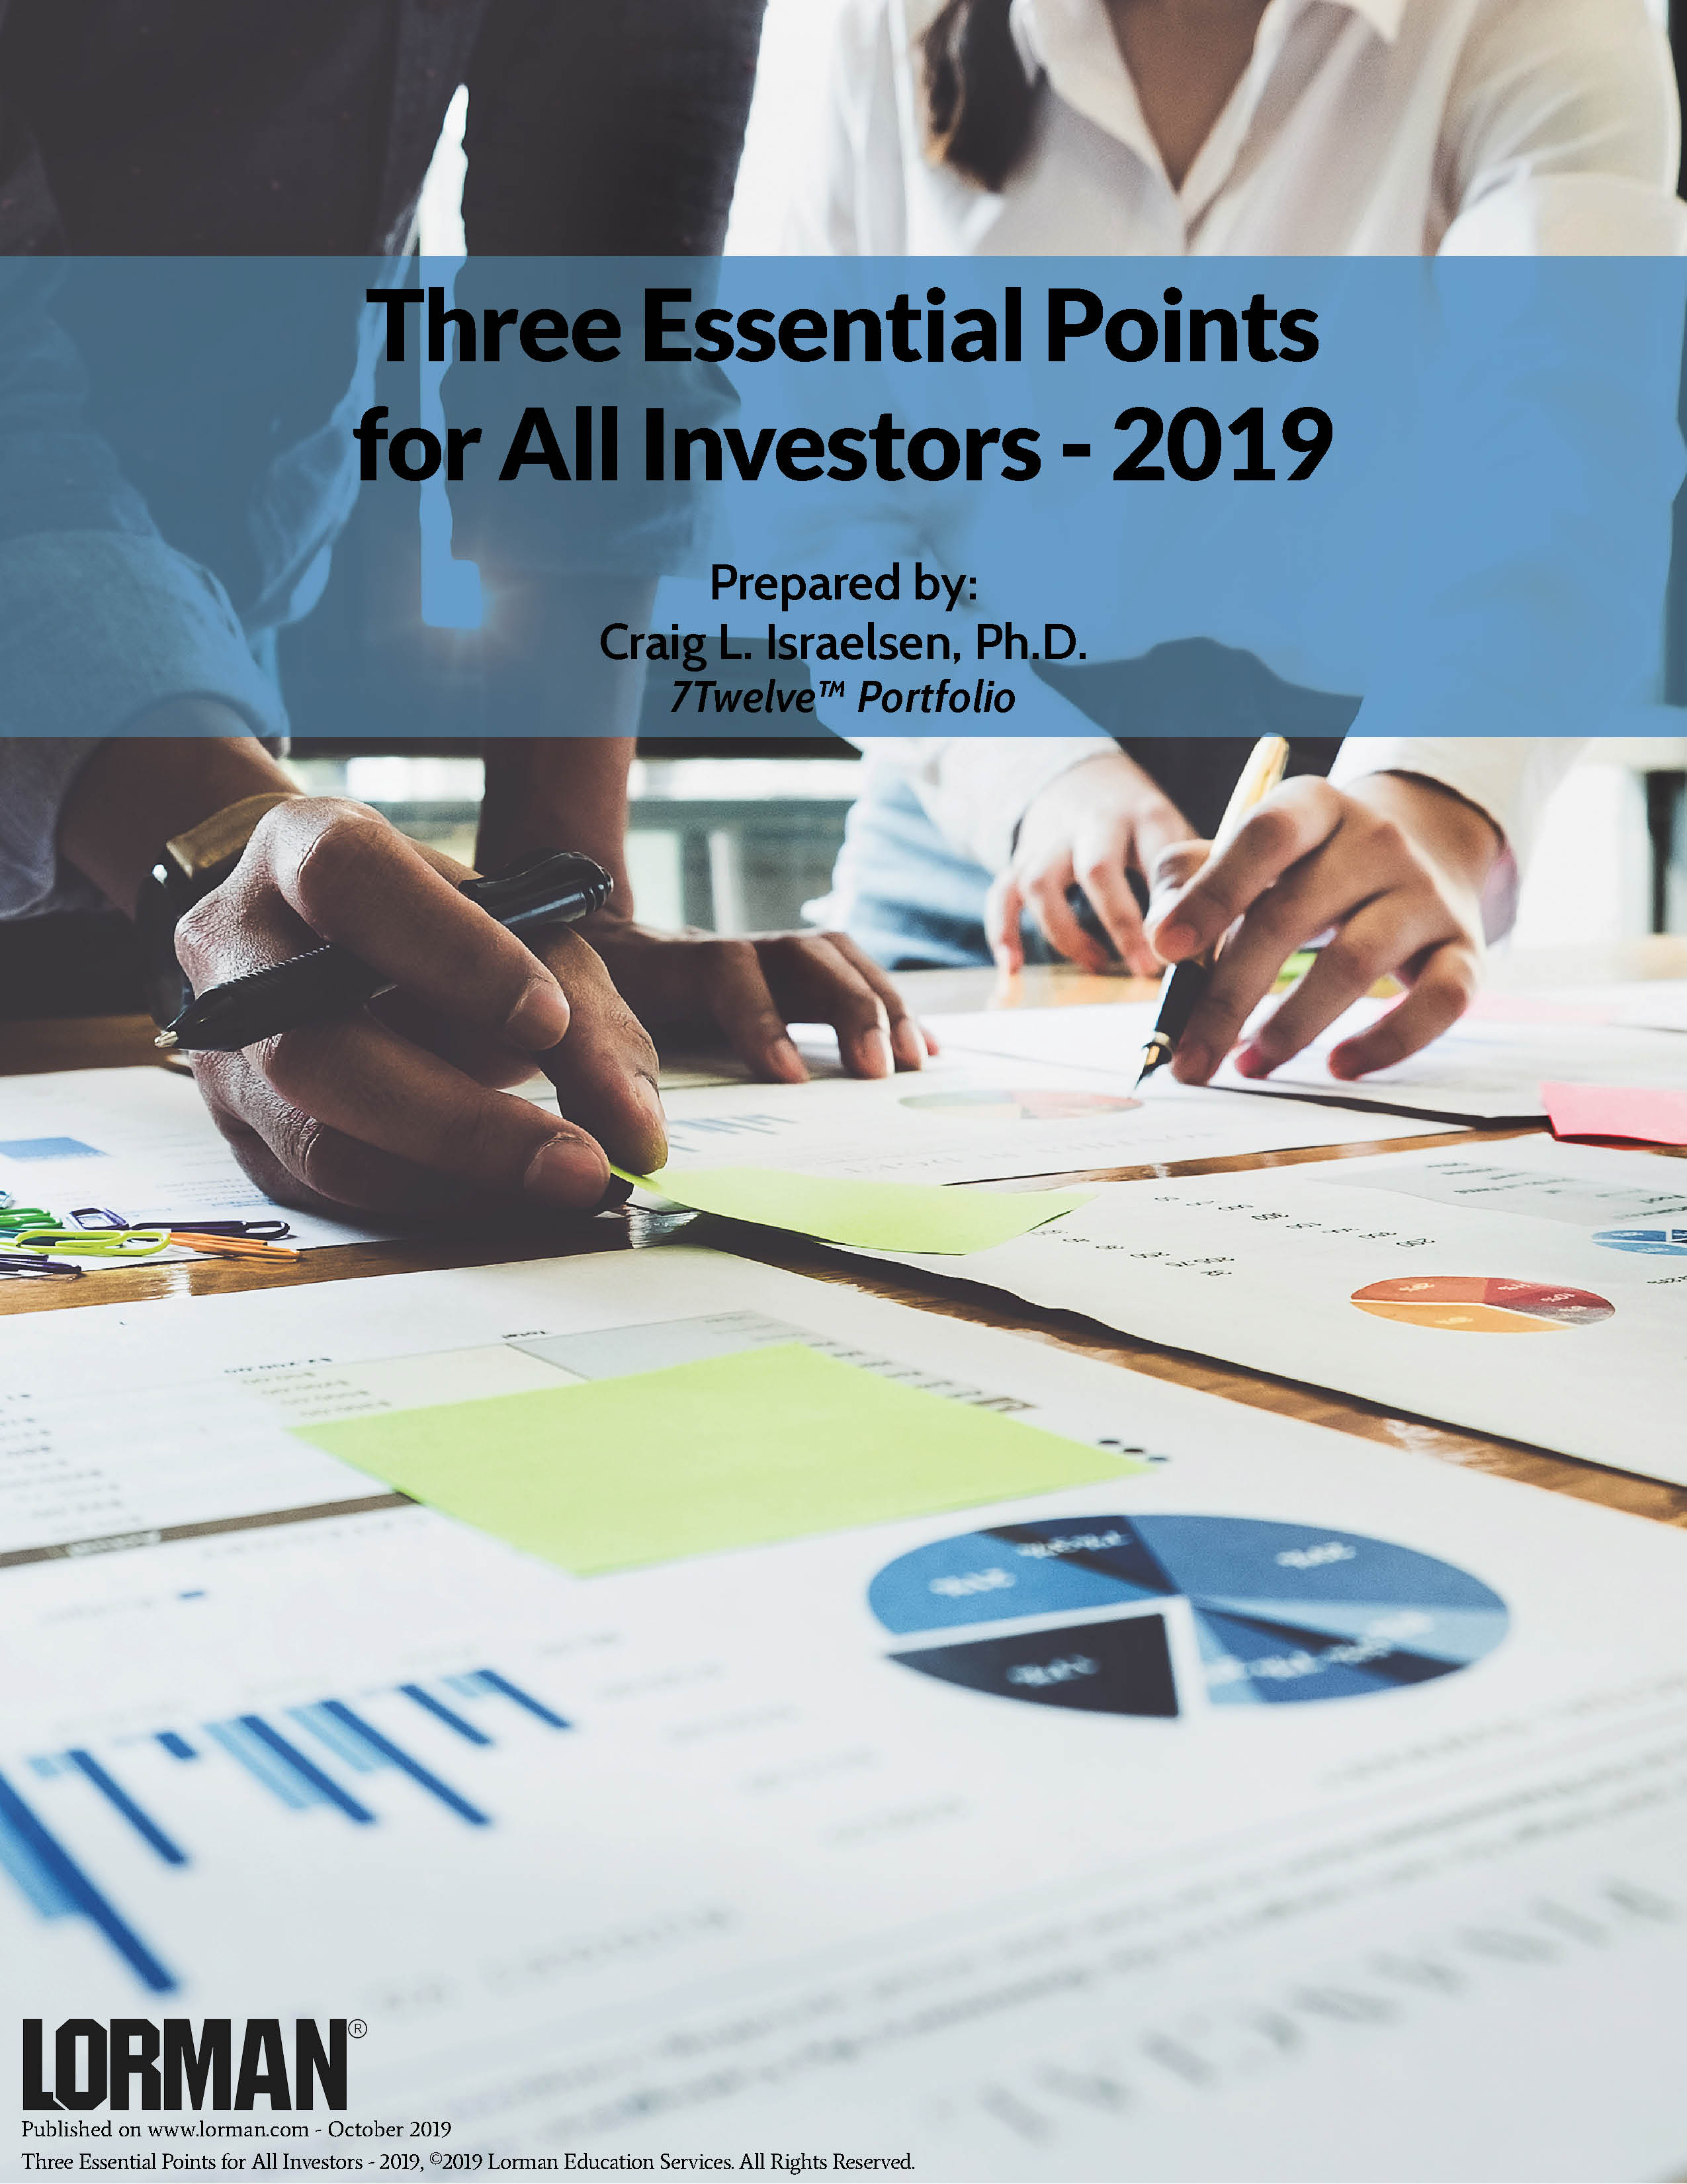 Three Essential Points for All Investors - 2019